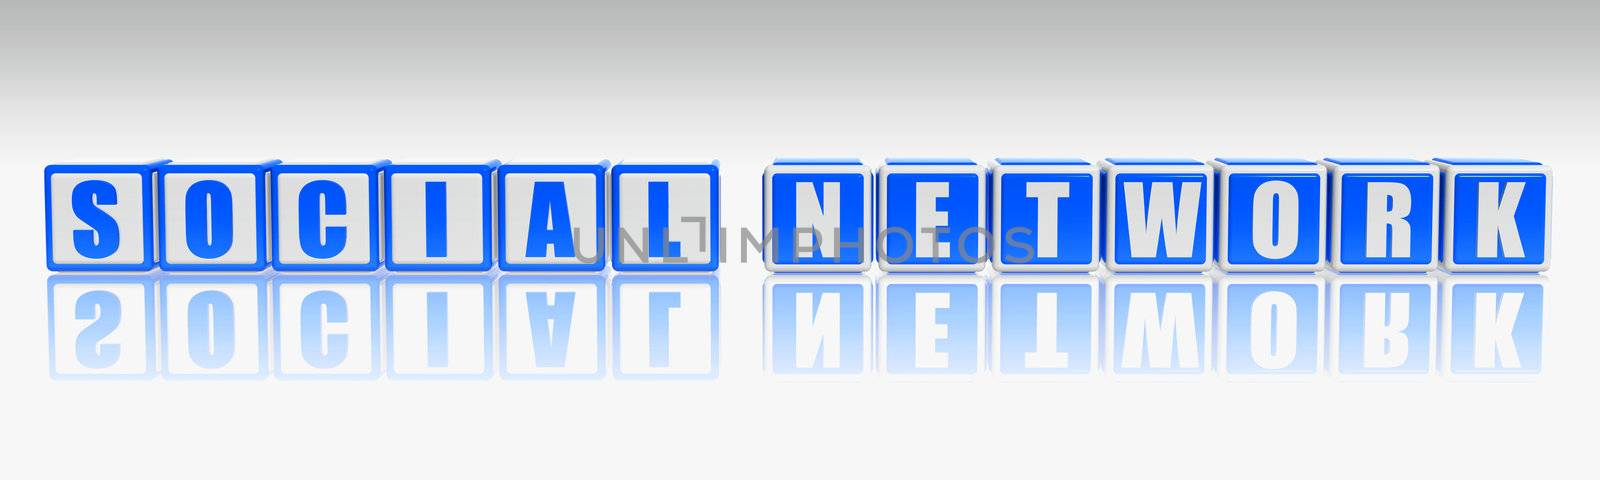 3d blue white cubes with letters - social network, word, text